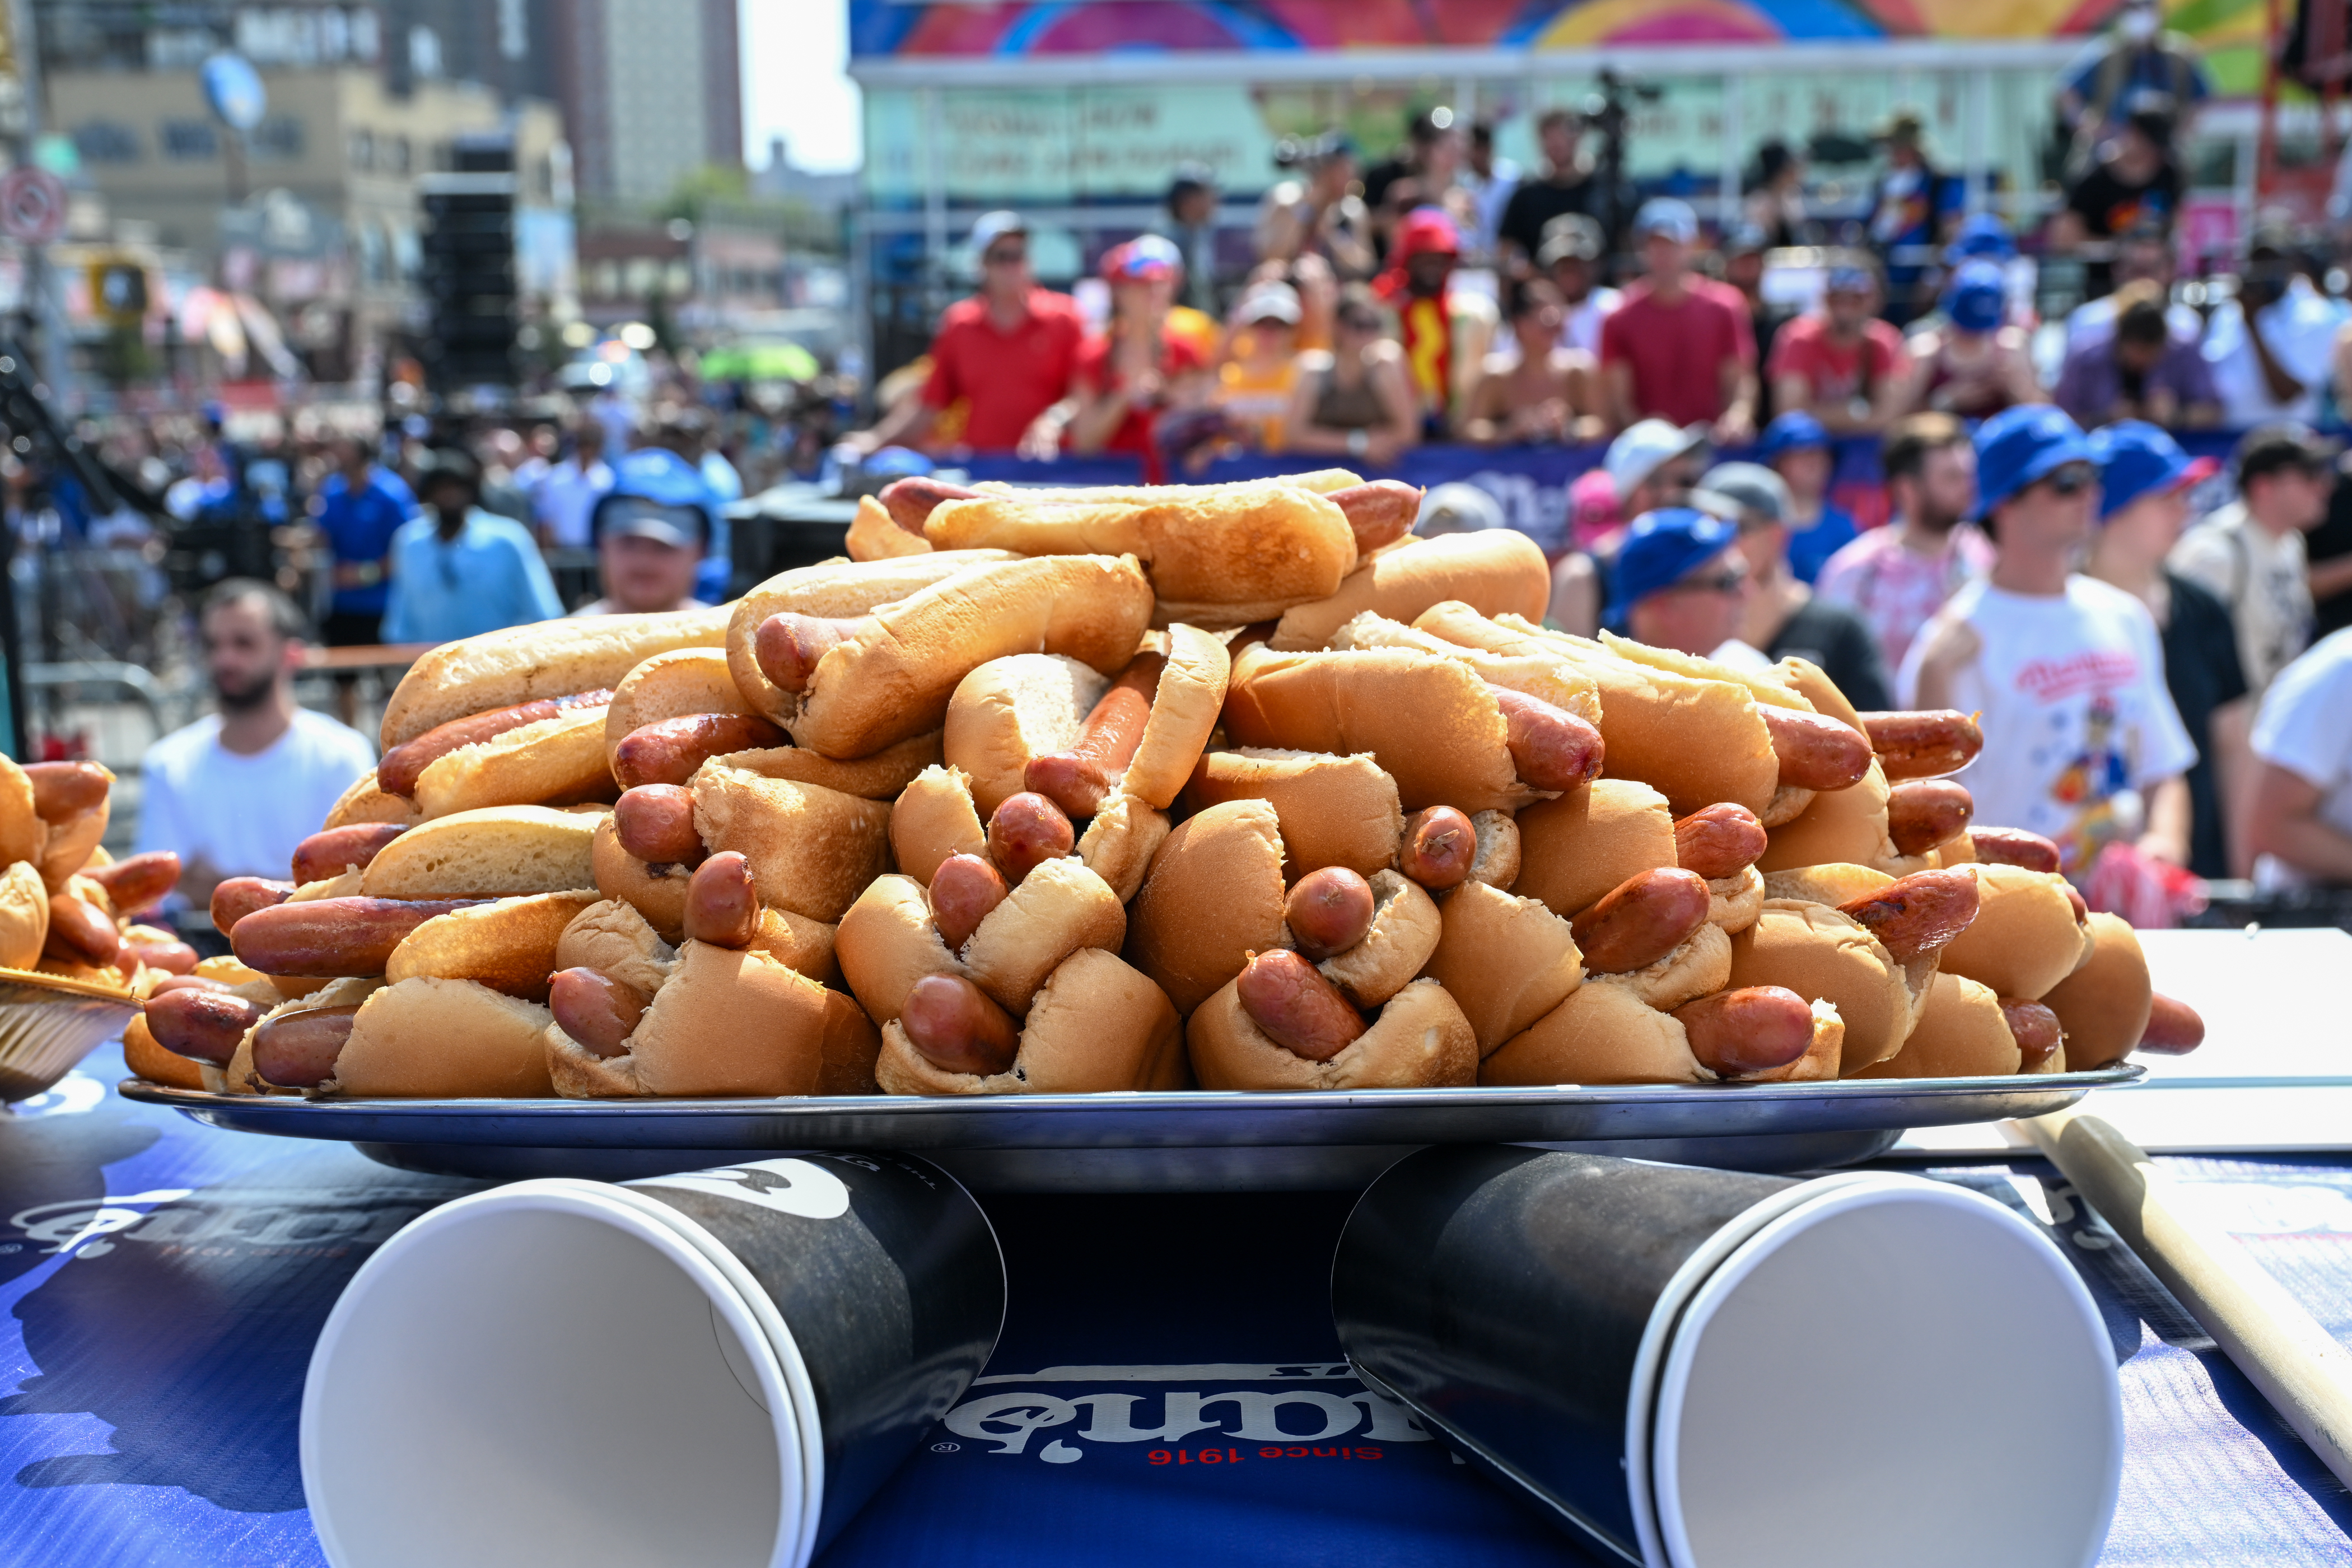 A photo of hot dogs, which may or may not be sandwiches.